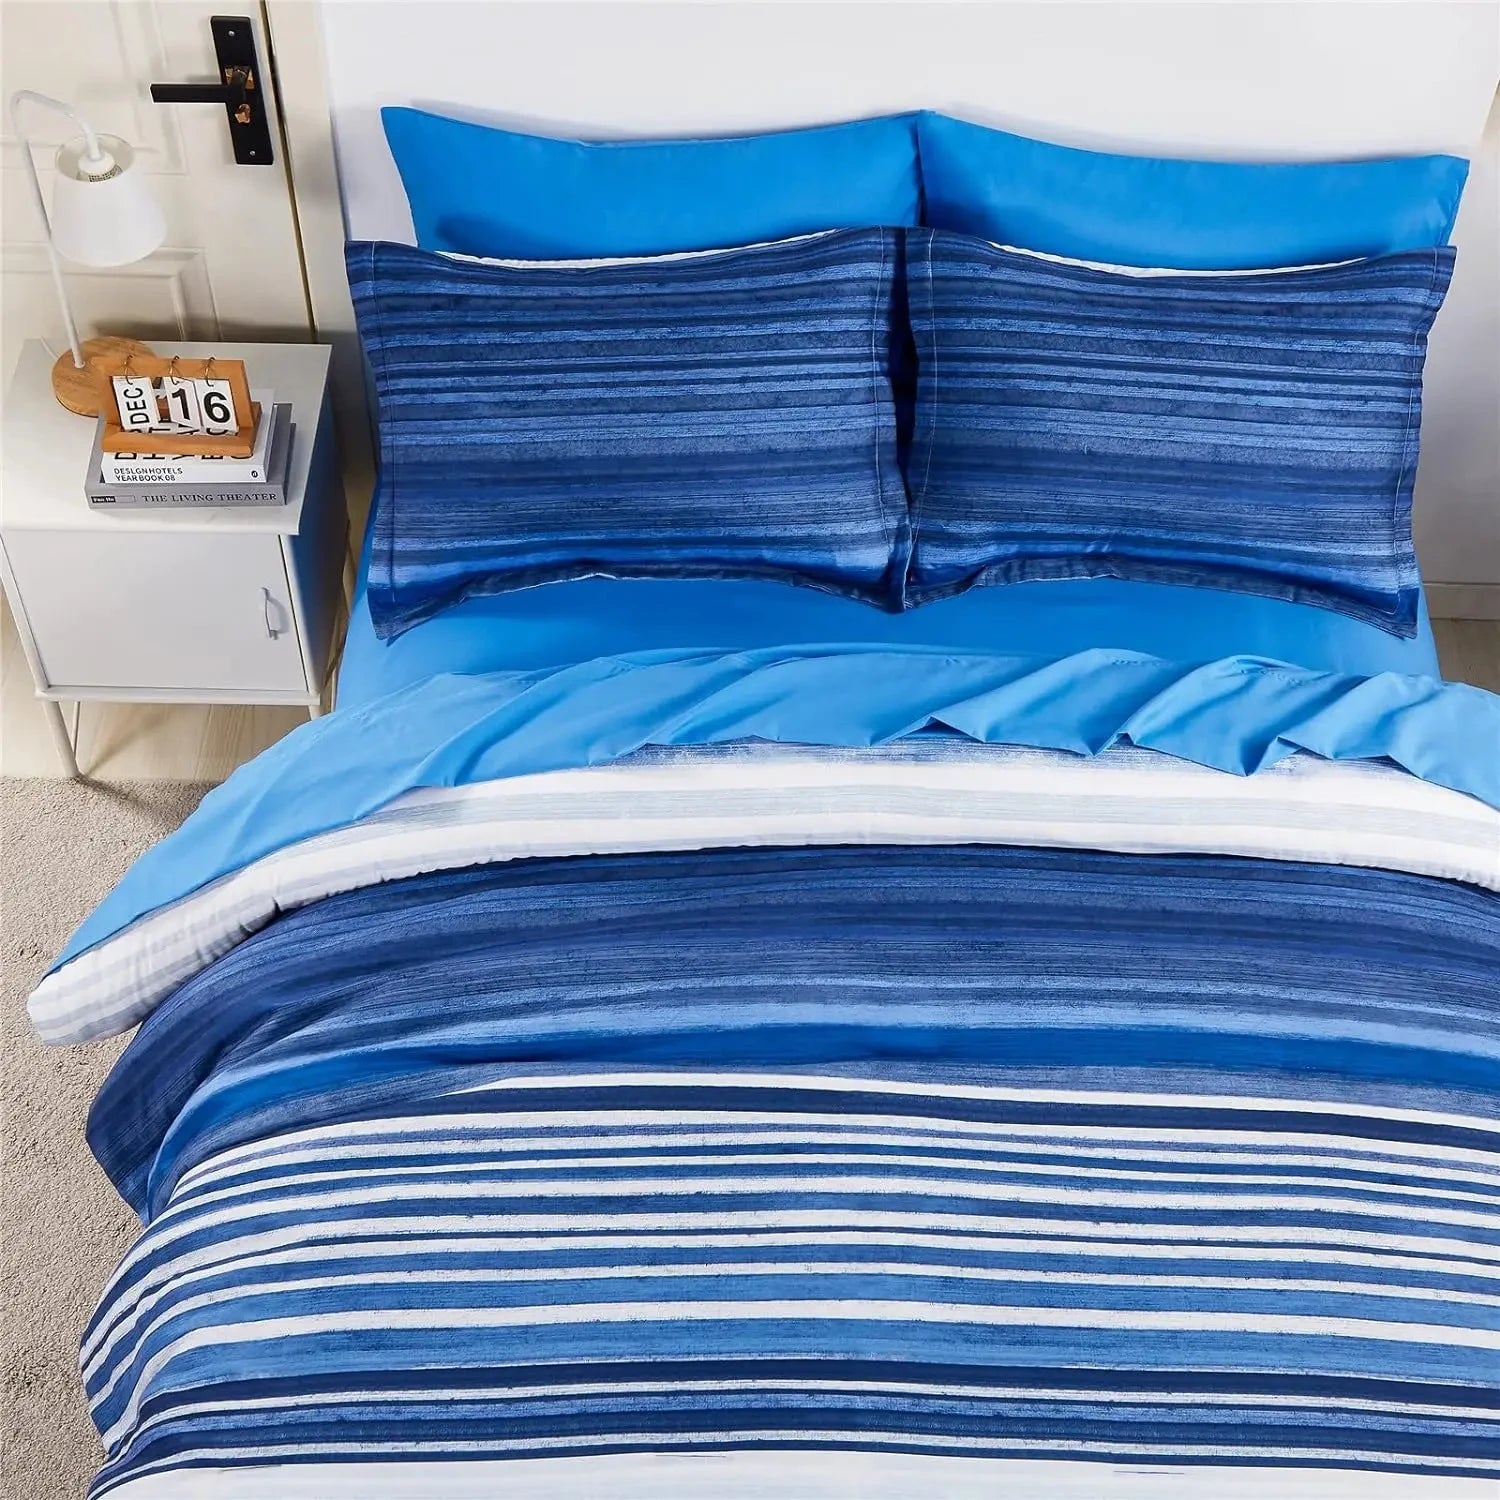 Pillow covers and duvet fitted with a Blue Striped Bedding set